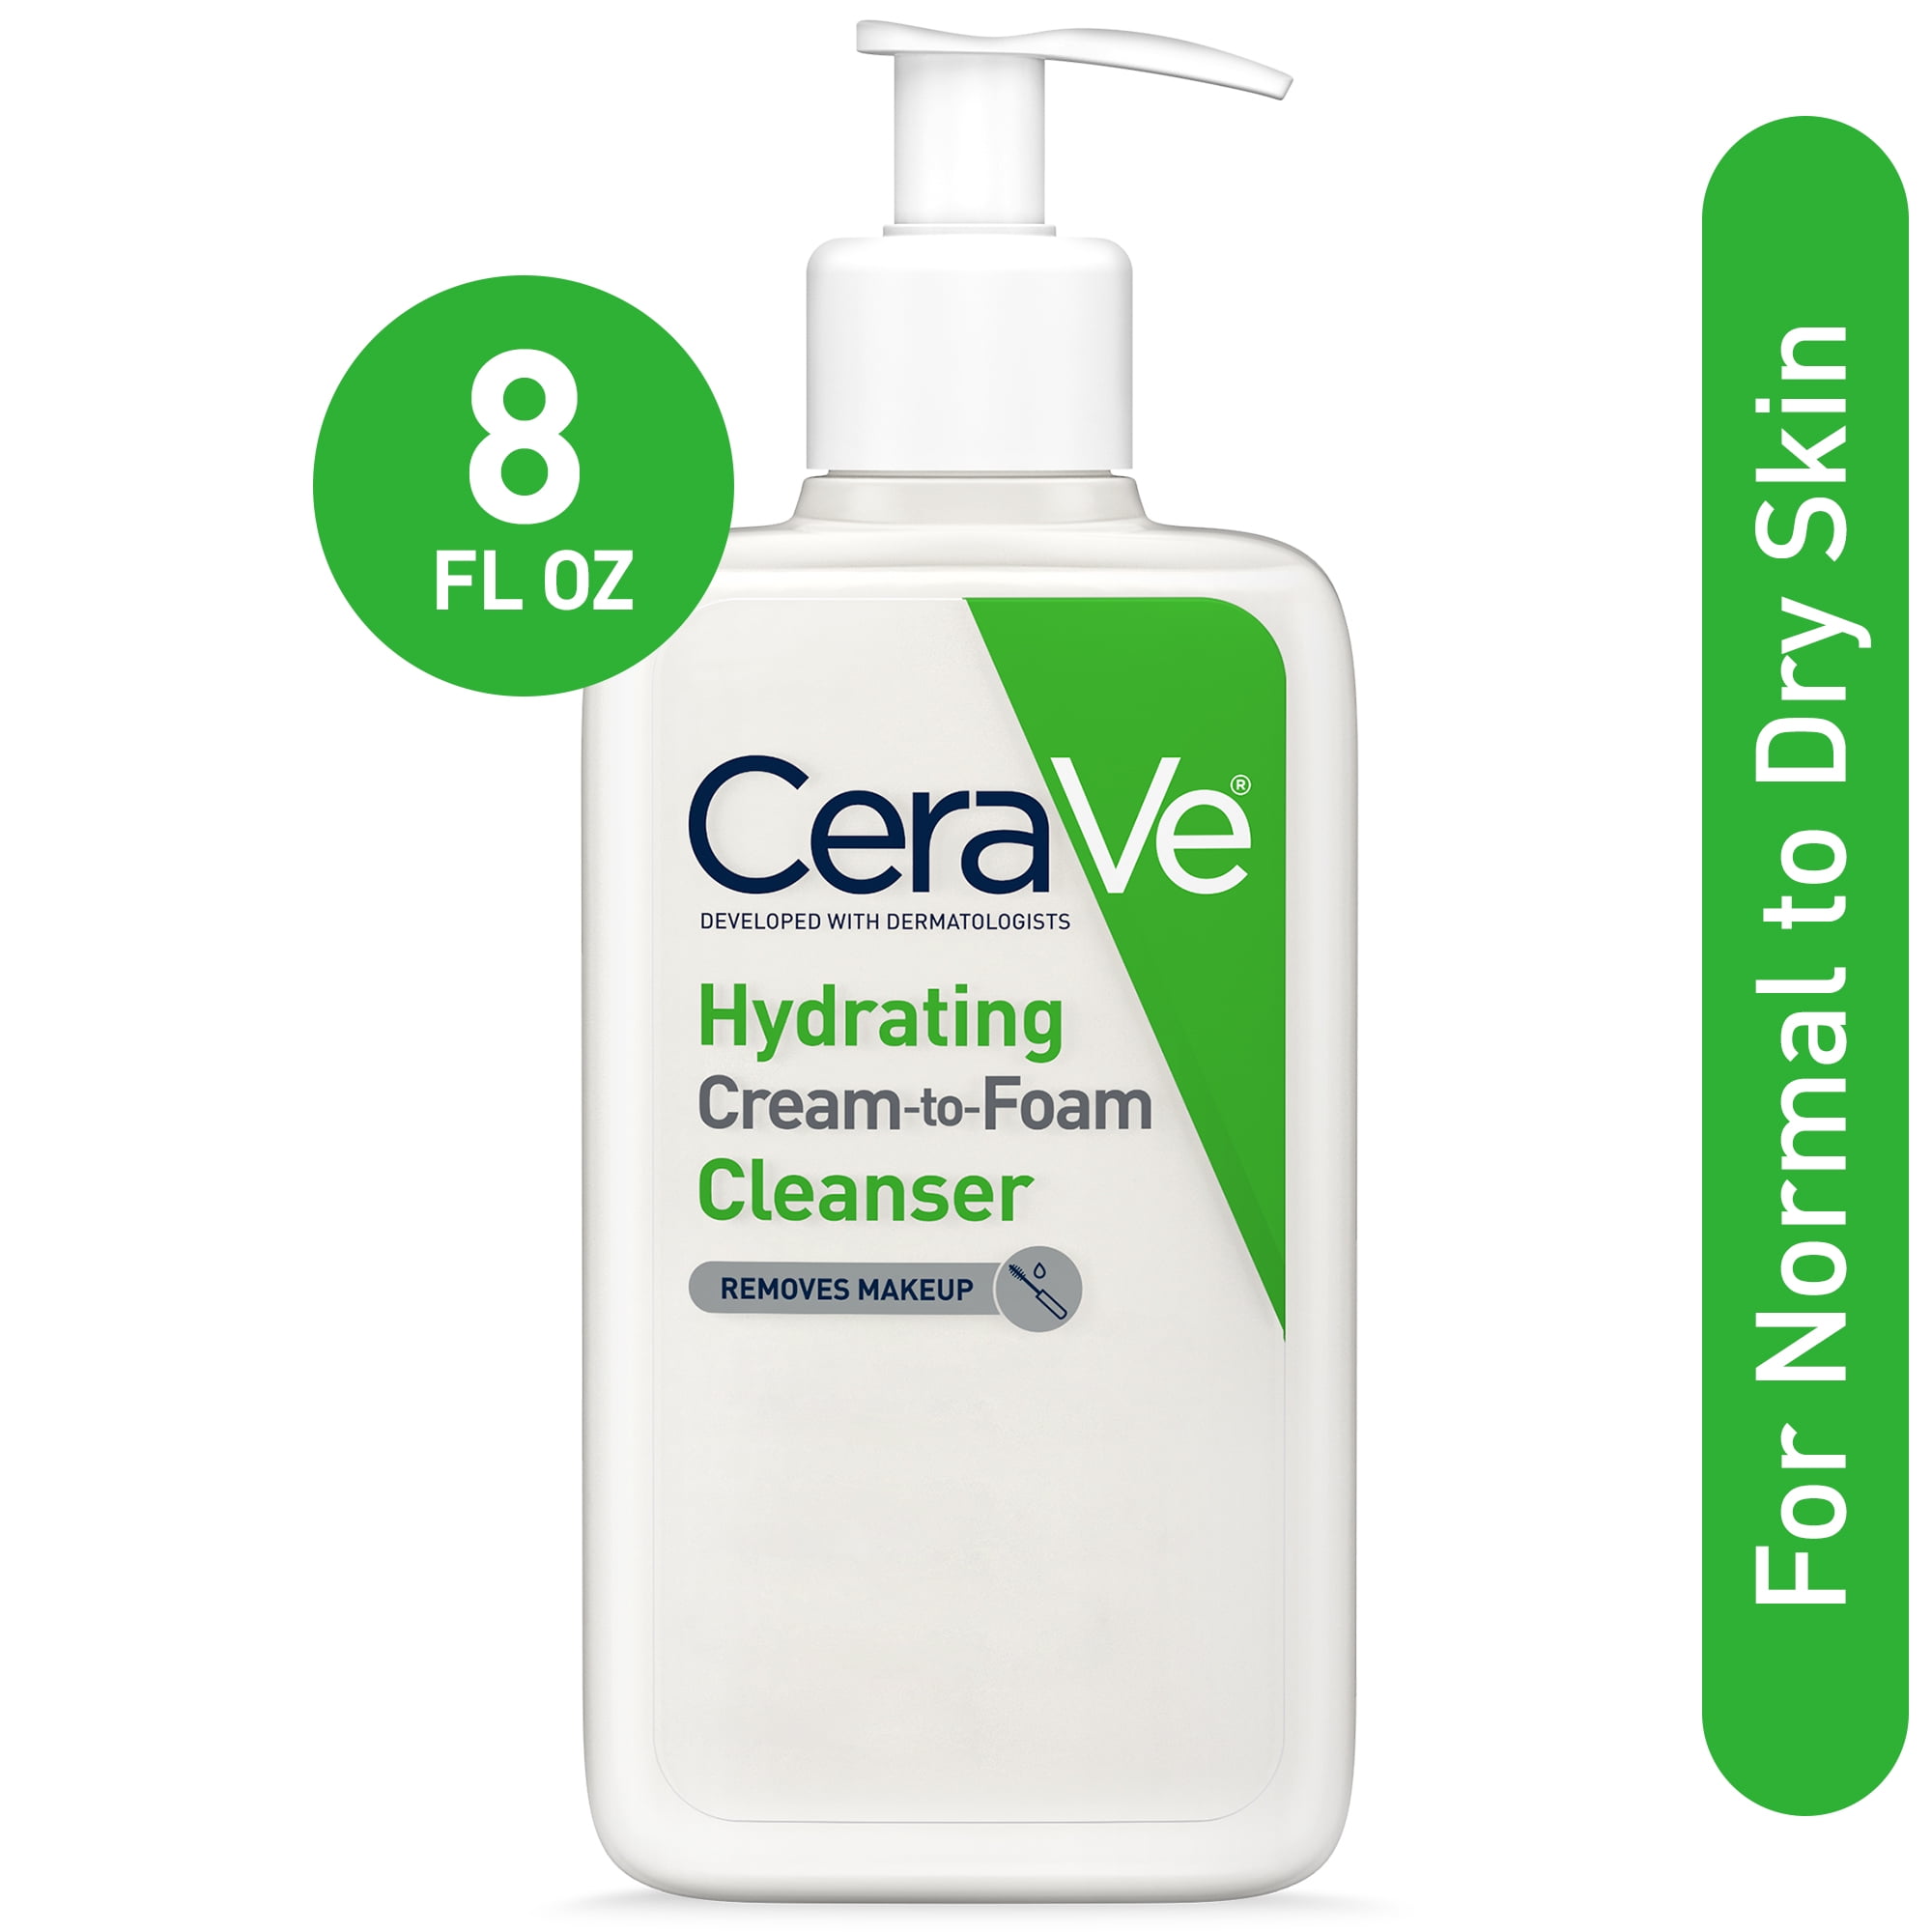 CeraVe Hydrating Cream-to-Foam Facial Cleanser with Hyaluronic Acid for Normal Dry Skin, 8 fl oz